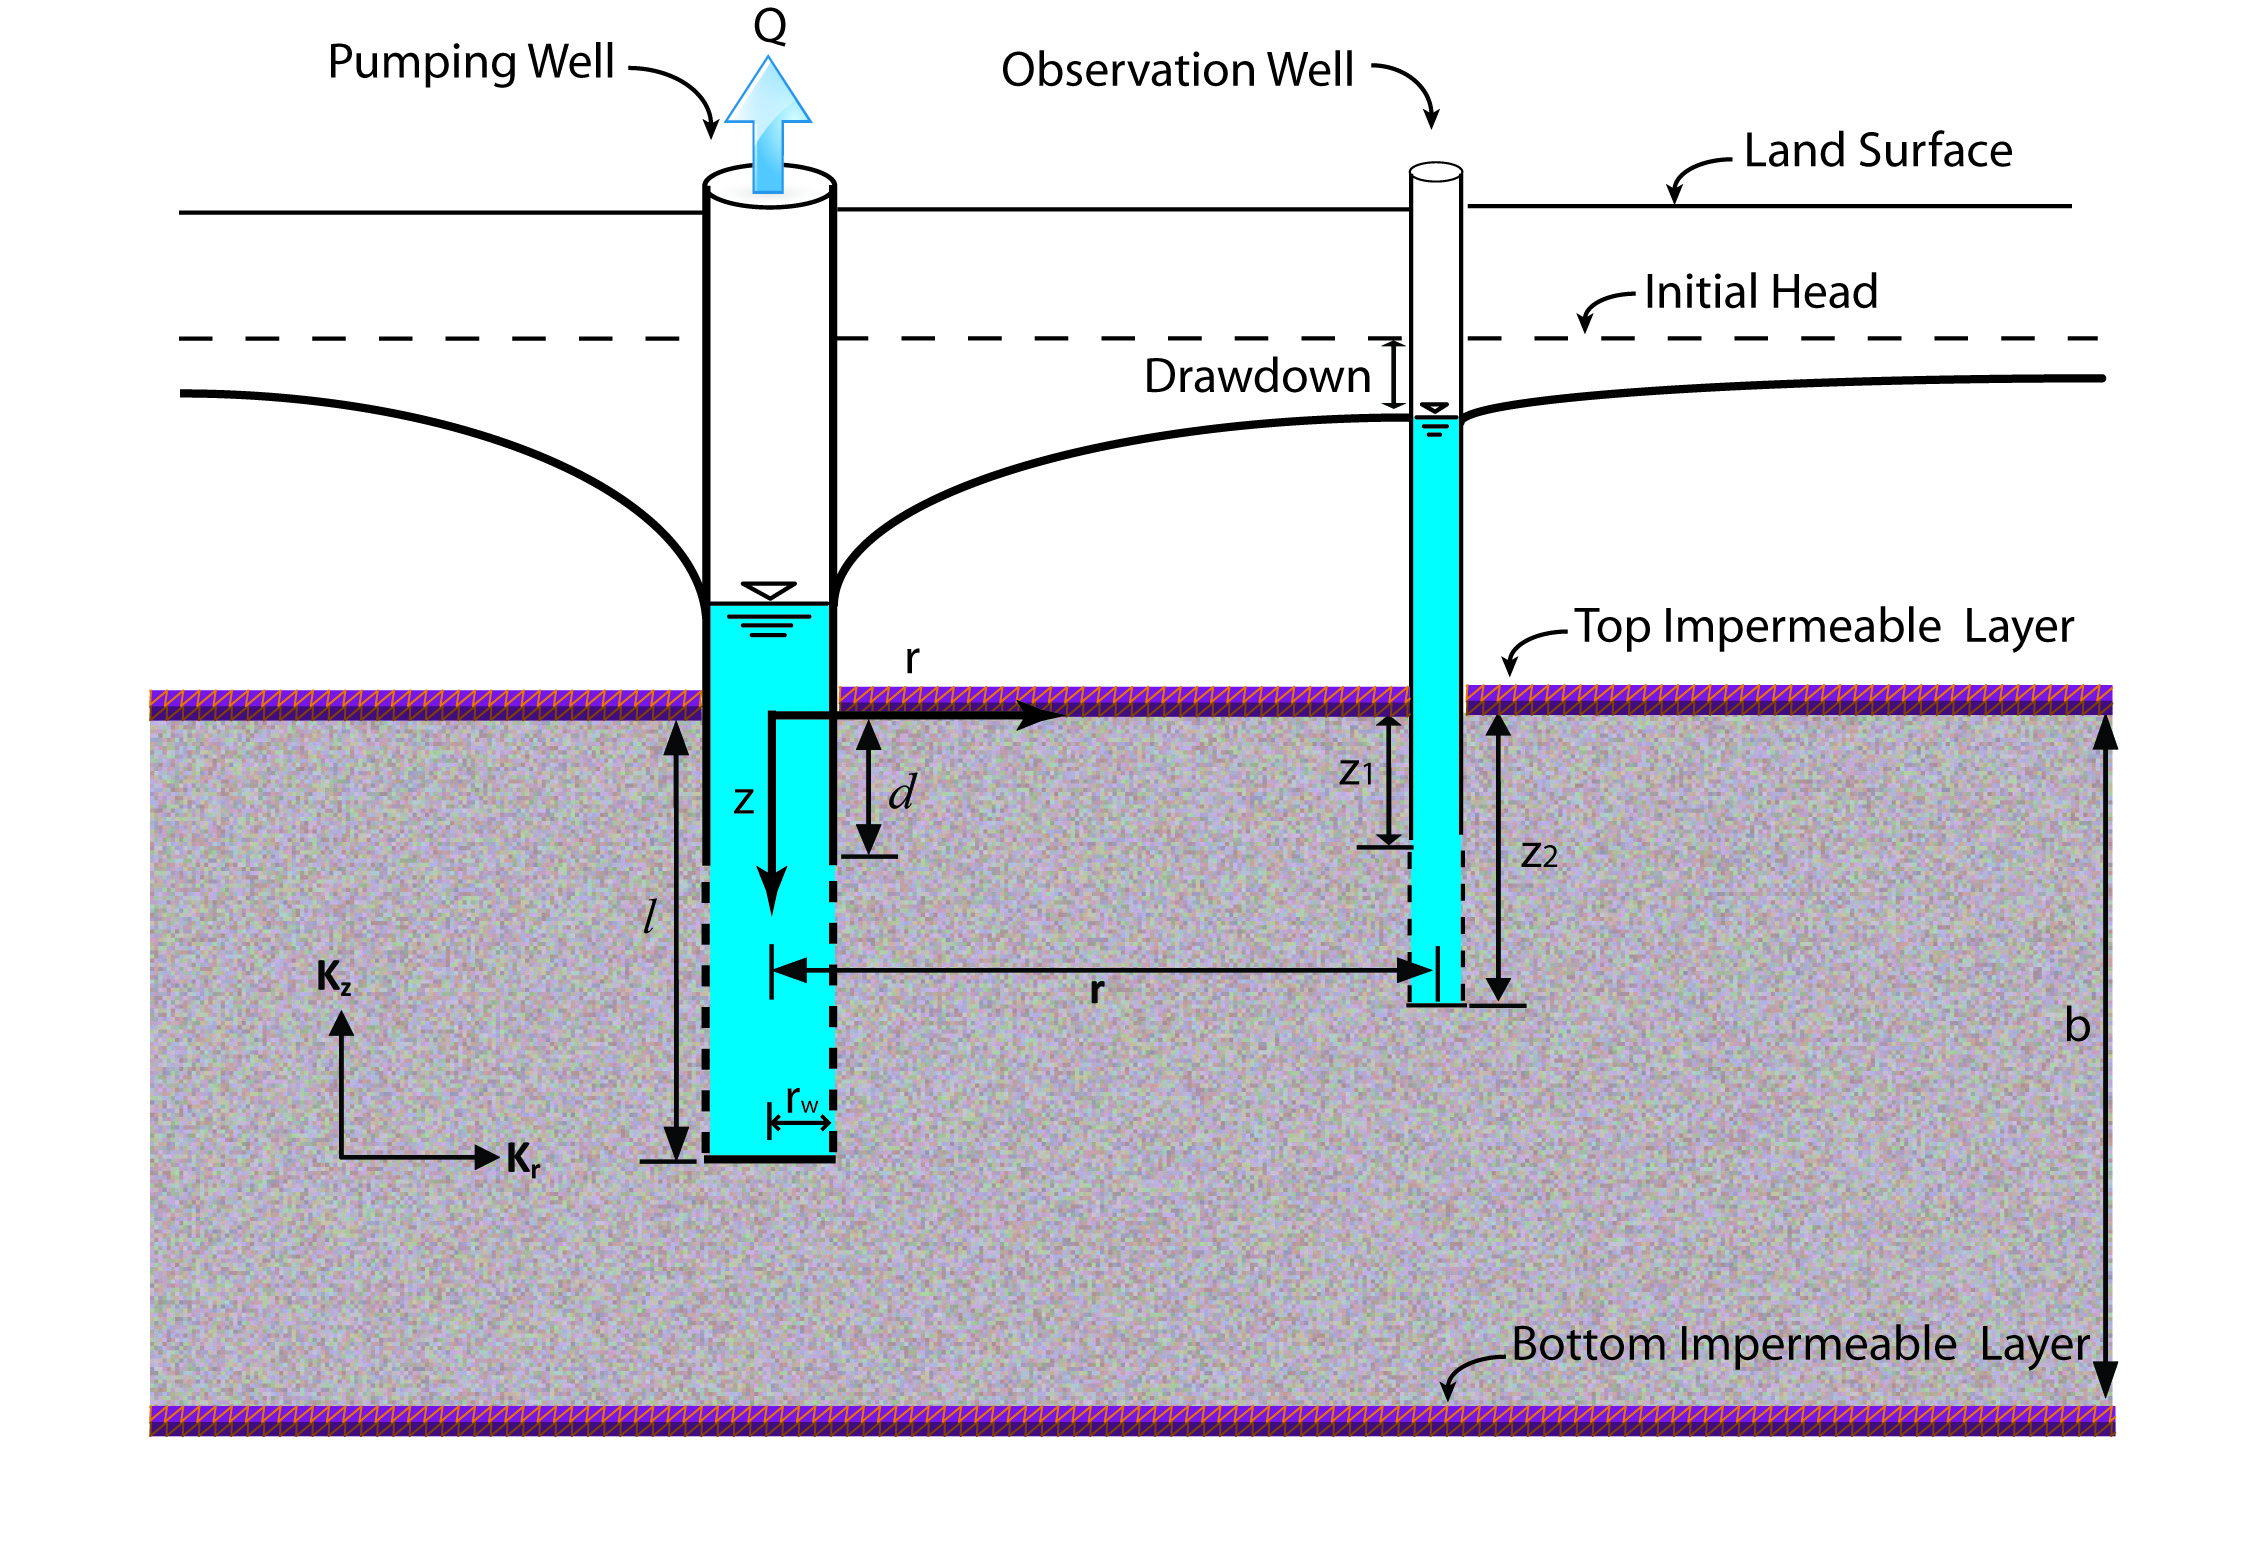 Schematic of confined Aquifer